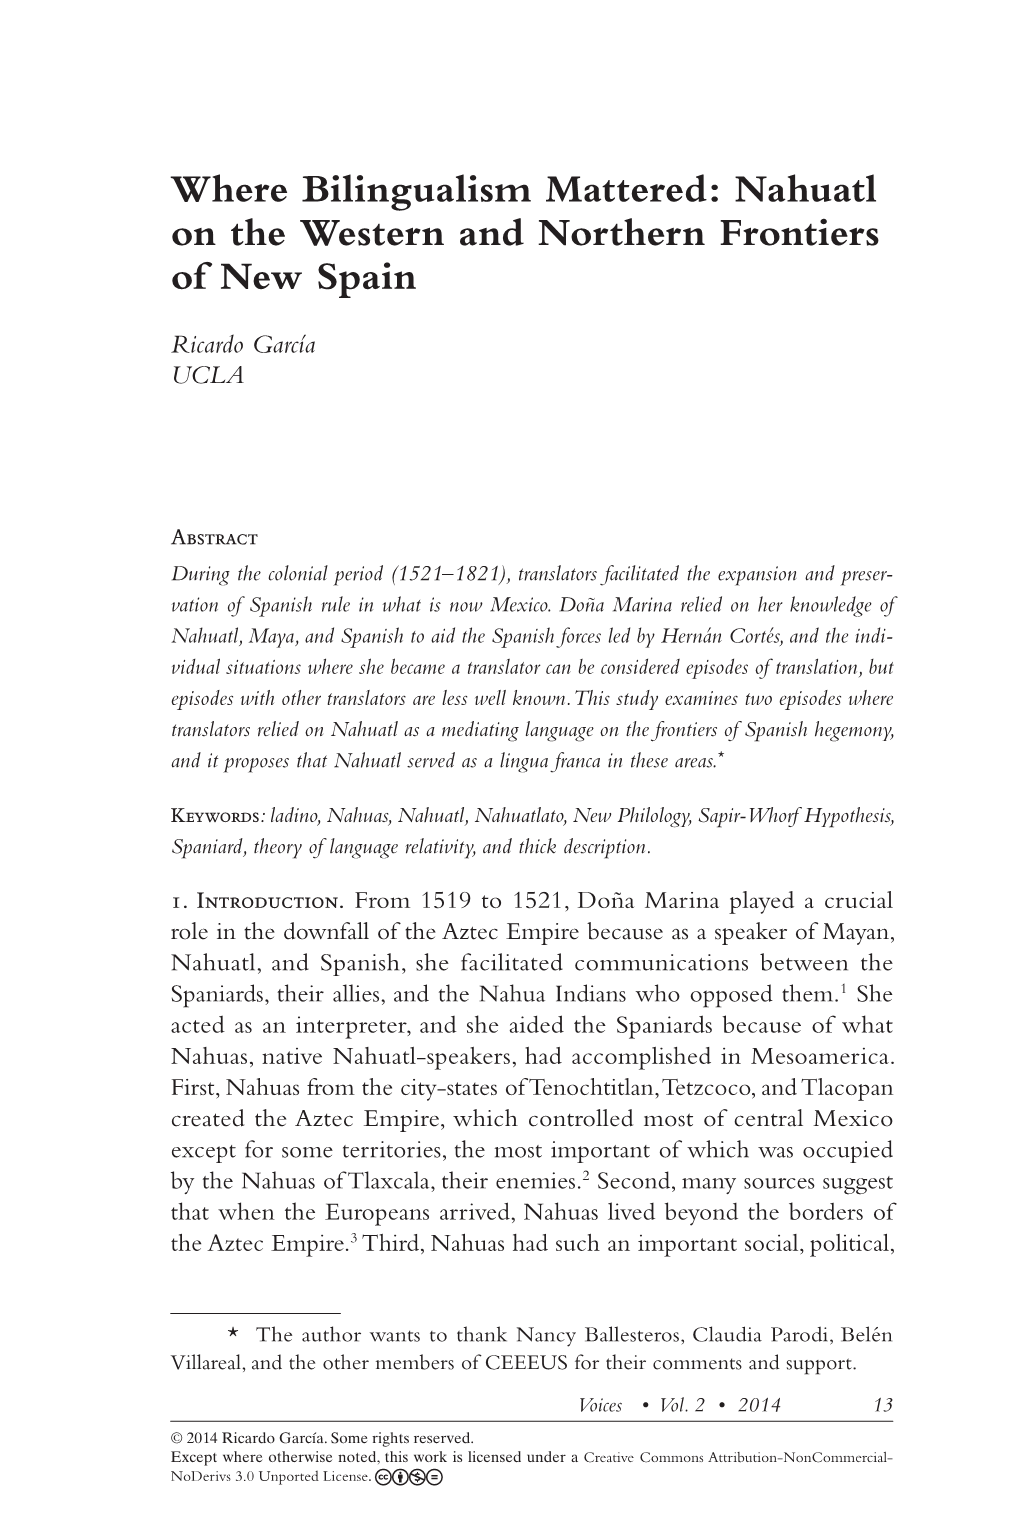 Nahuatl on the Western and Northern Frontiers of New Spain